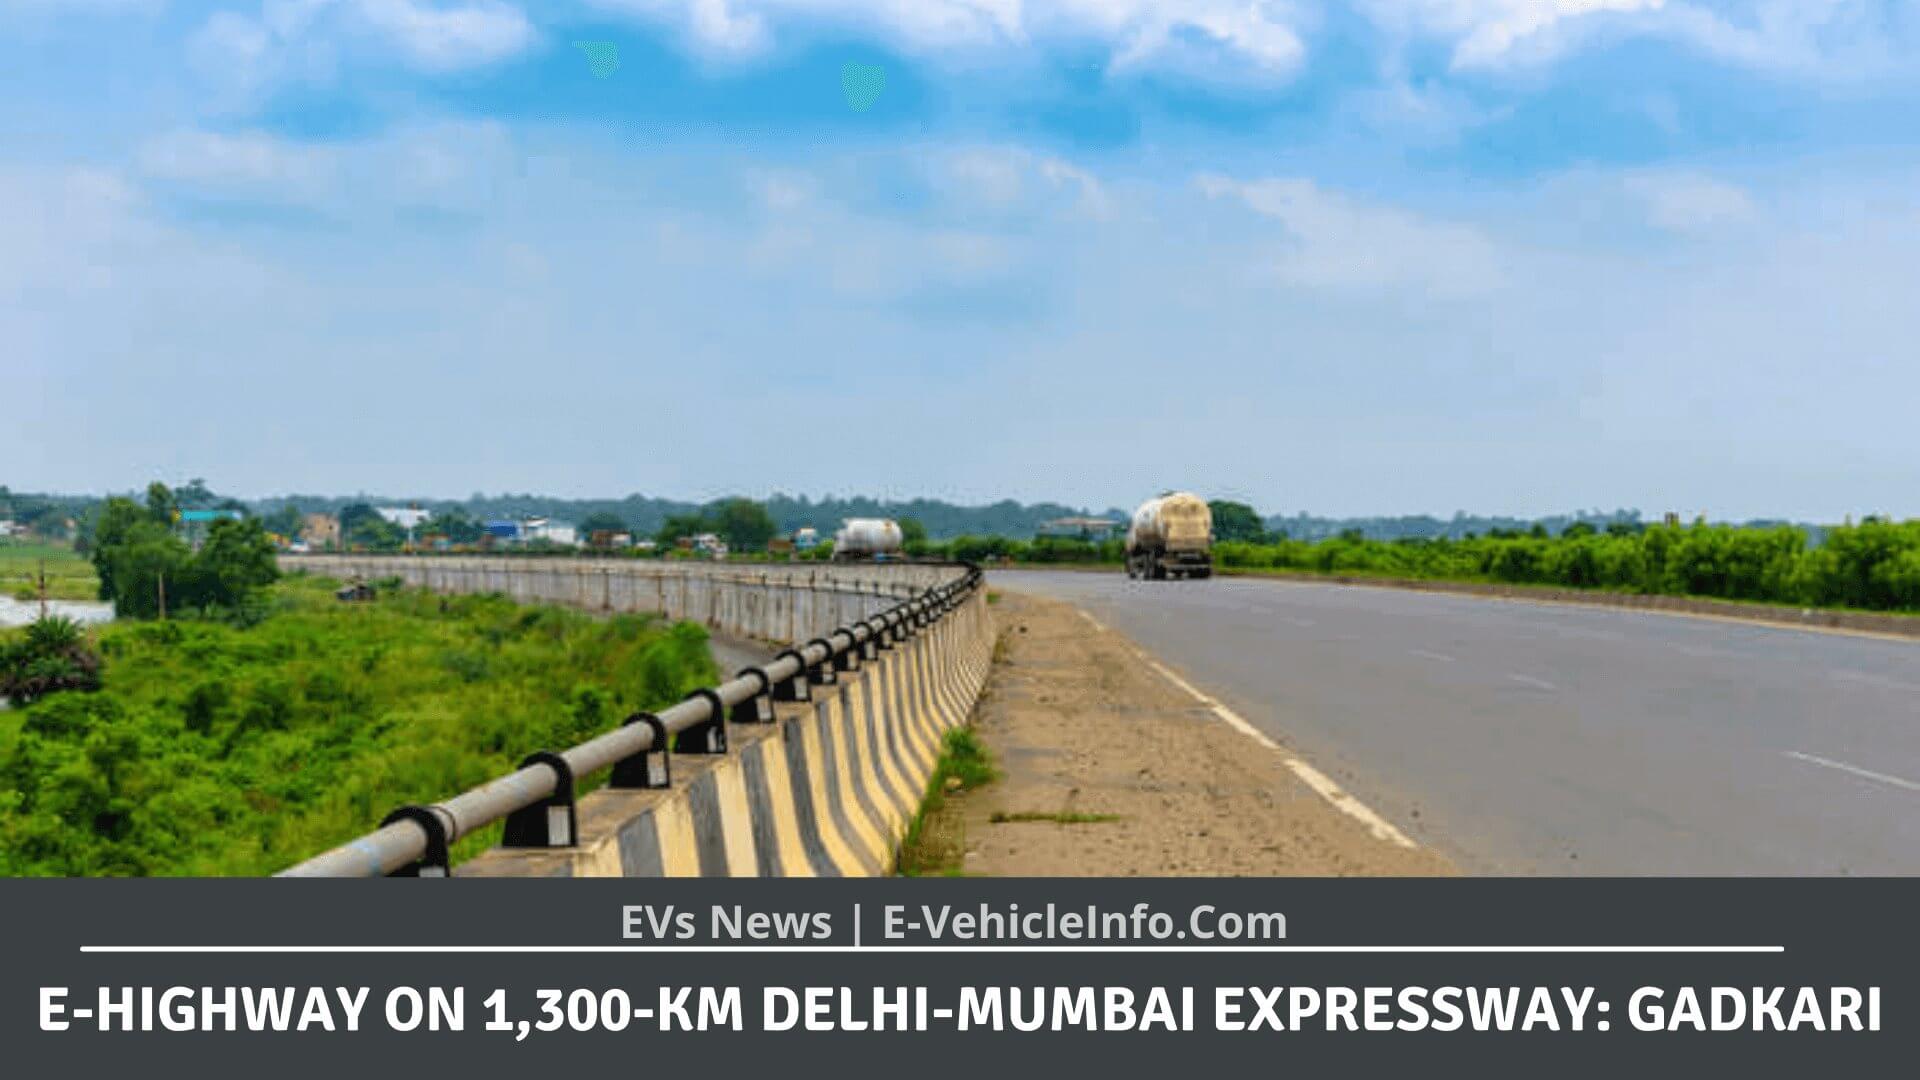 https://e-vehicleinfo.com/india-to-build-a-new-electric-highway-delhi-jaipur-highway-by-2022/